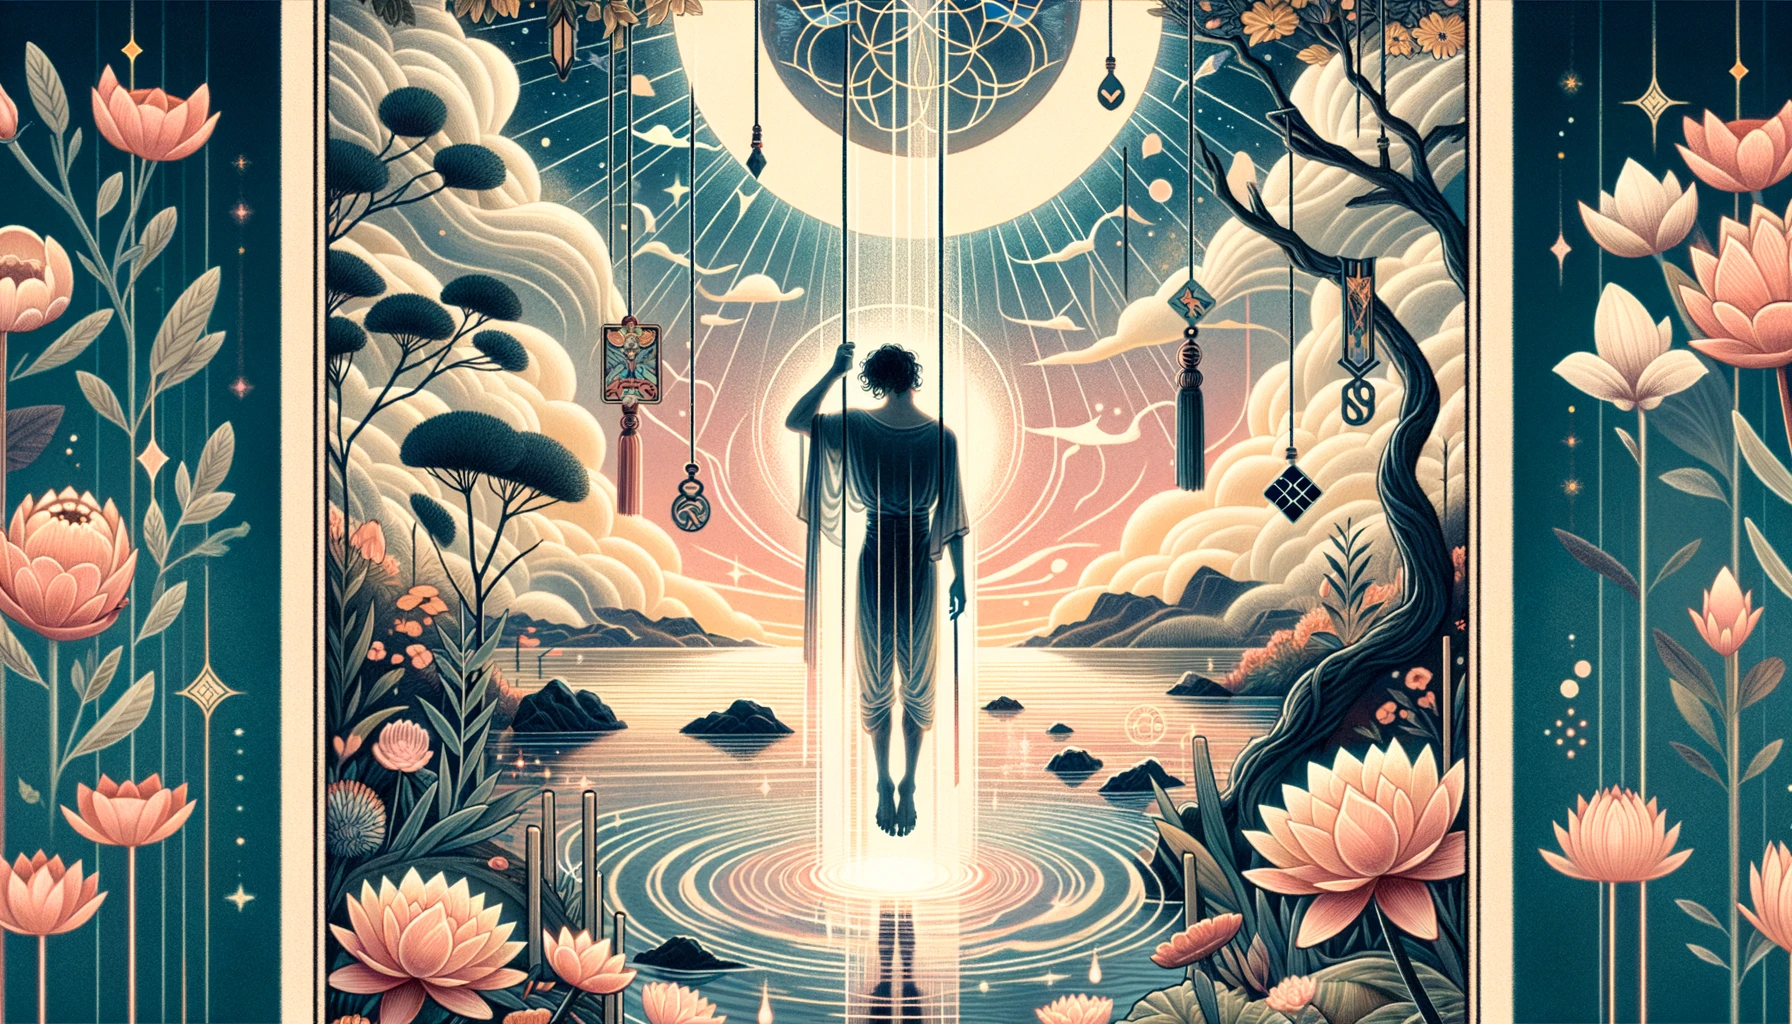 "Illustration featuring a serene figure suspended upside down, suggesting introspection and anticipation of enlightenment. It sets a serene and insightful tone for your article discussing the complexities of 'The Hanged Man' card."